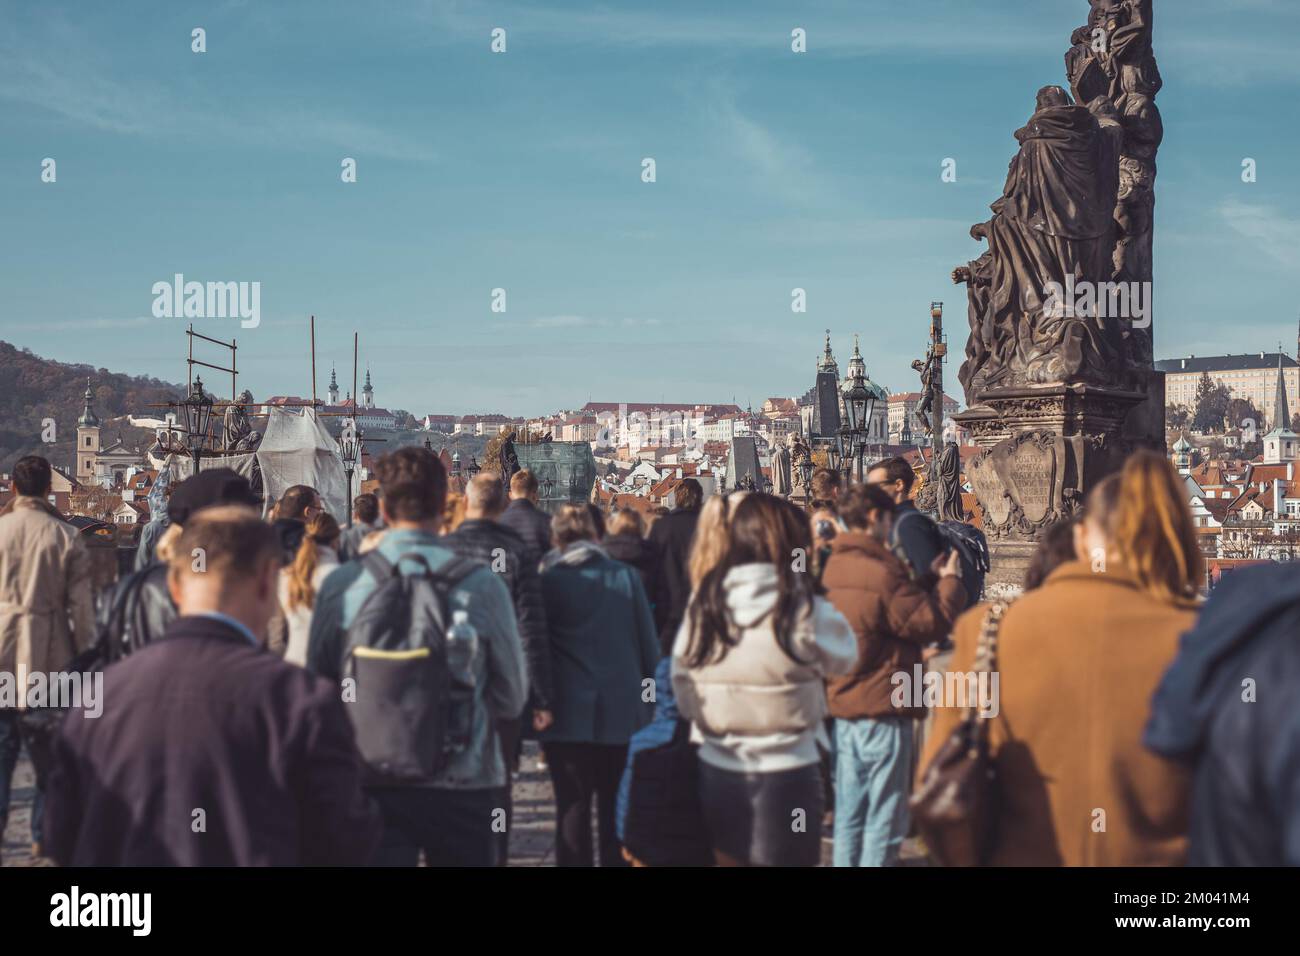 Multitude of people on charles bridge in prague, with the view towards the famous hradcani hill on a crowded autumn day. Stock Photo